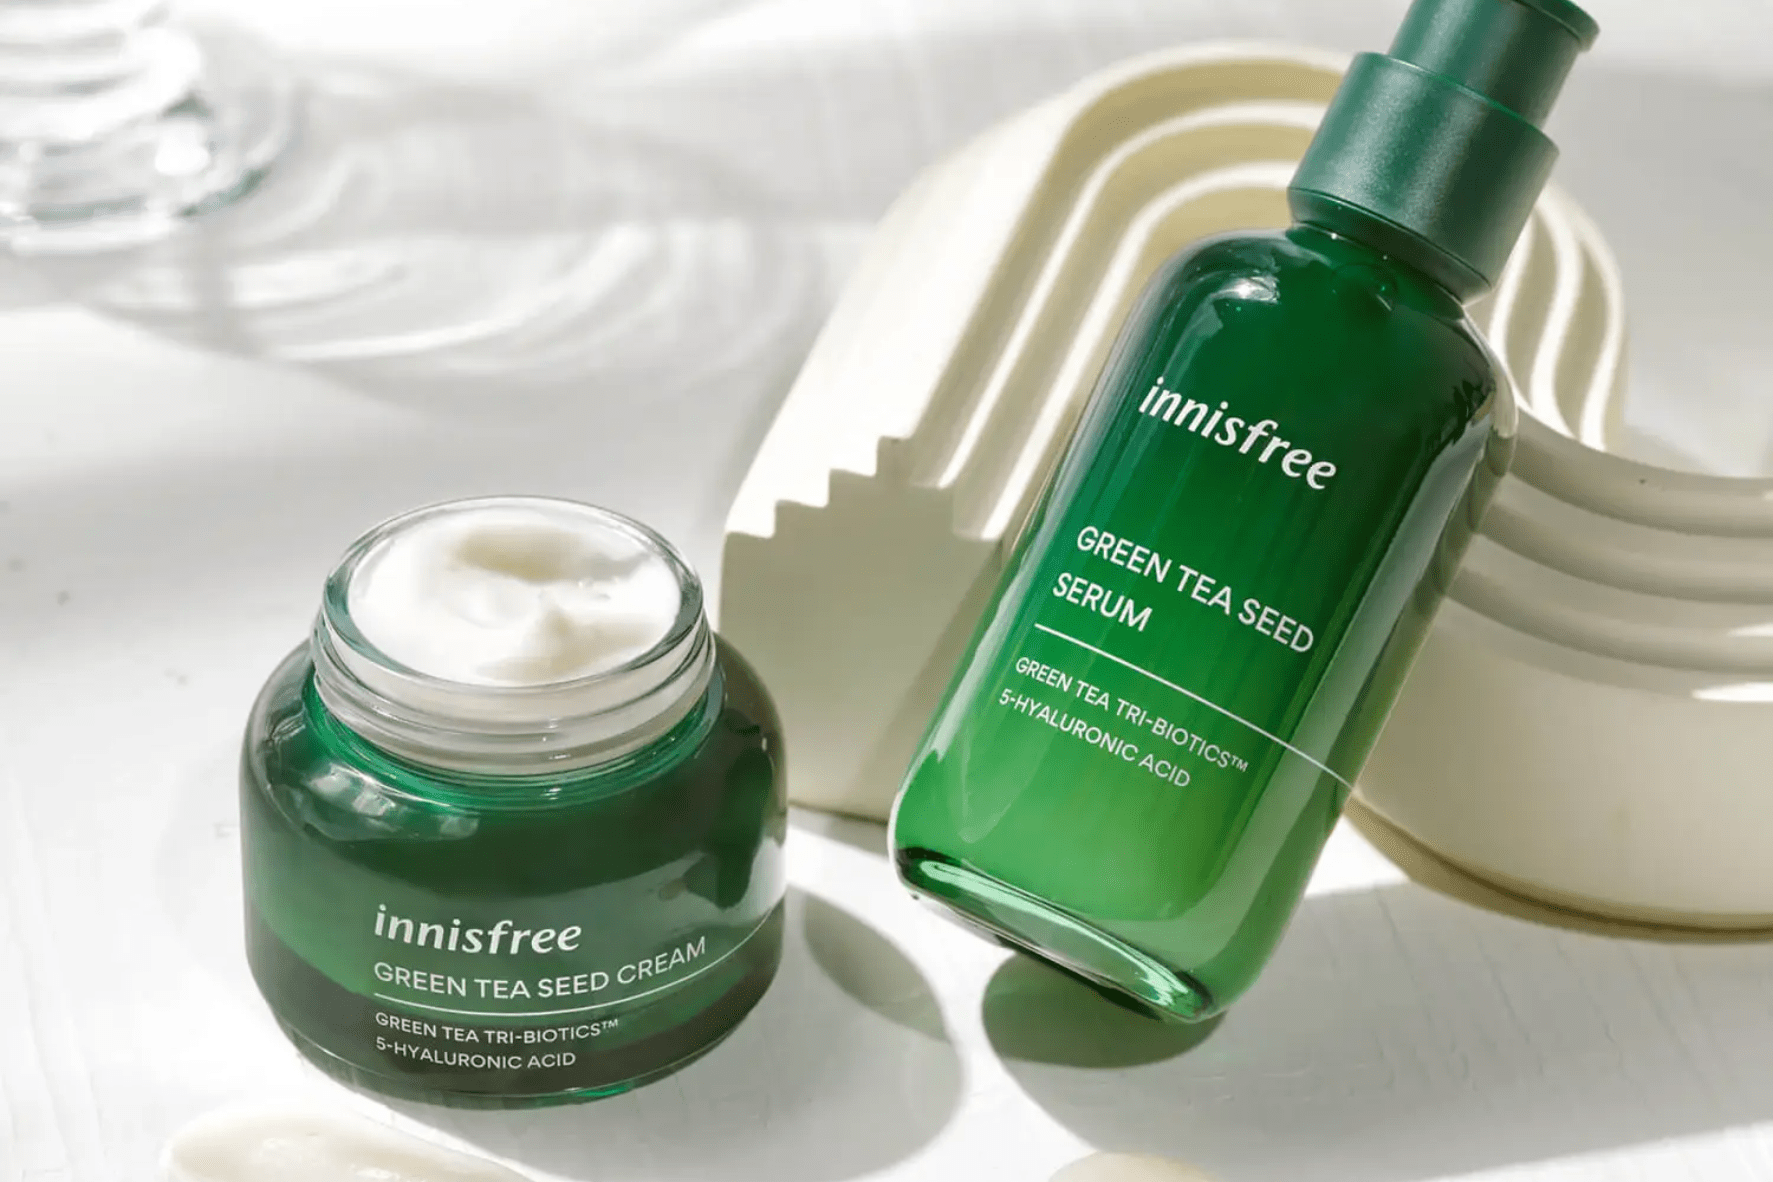 Get to know innisfree’s three bestselling beauty must-haves!